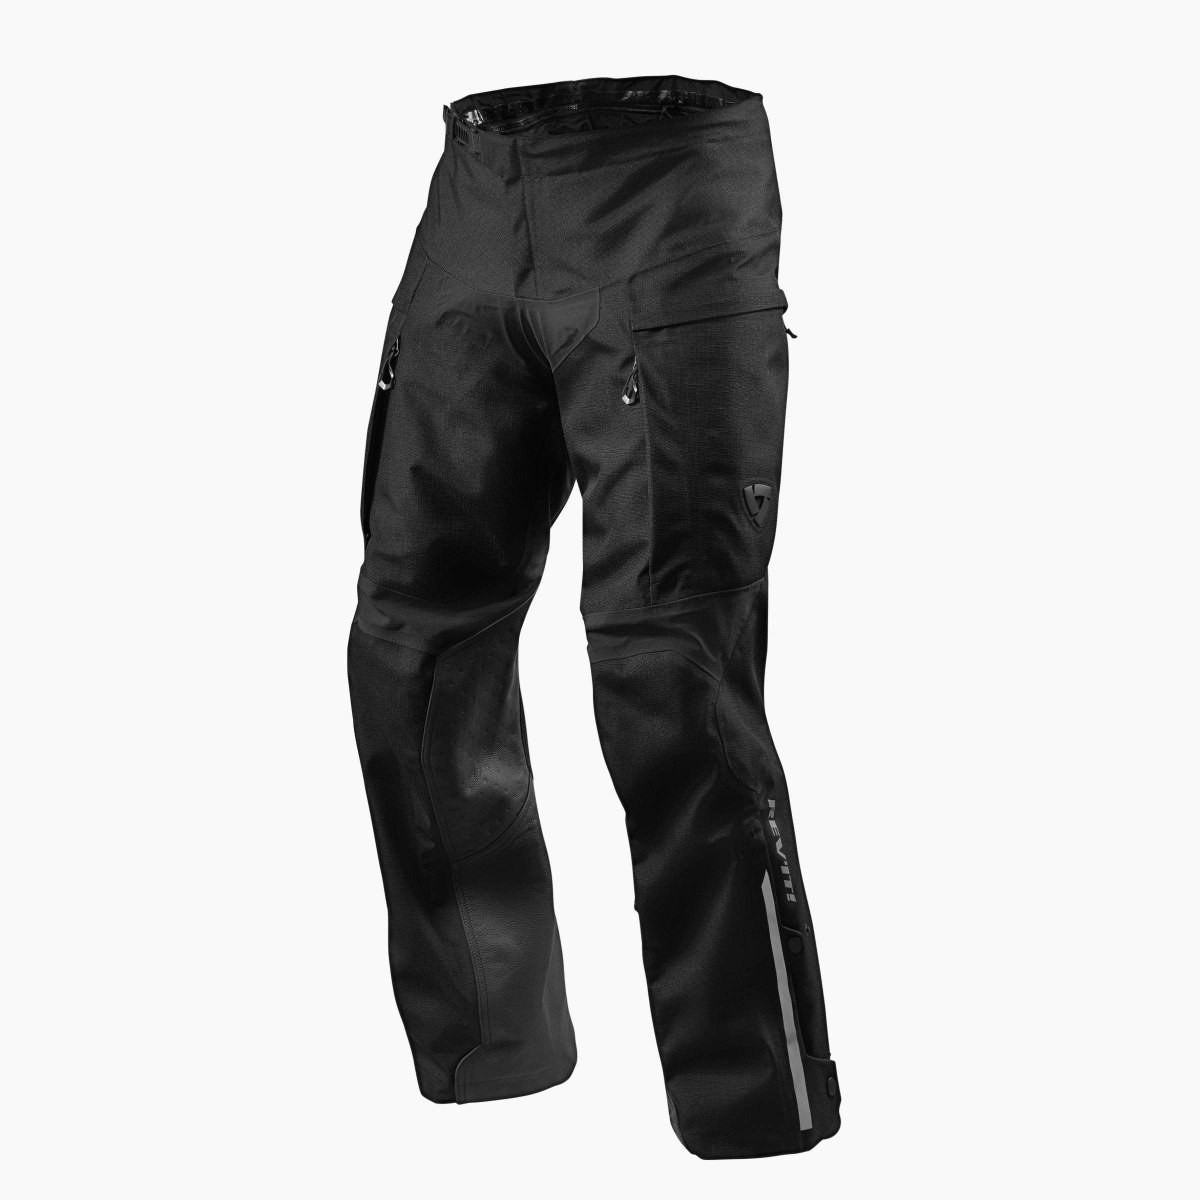 Image of REV'IT! Component H2O Standard Black Motorcycle Pants Talla 2XL